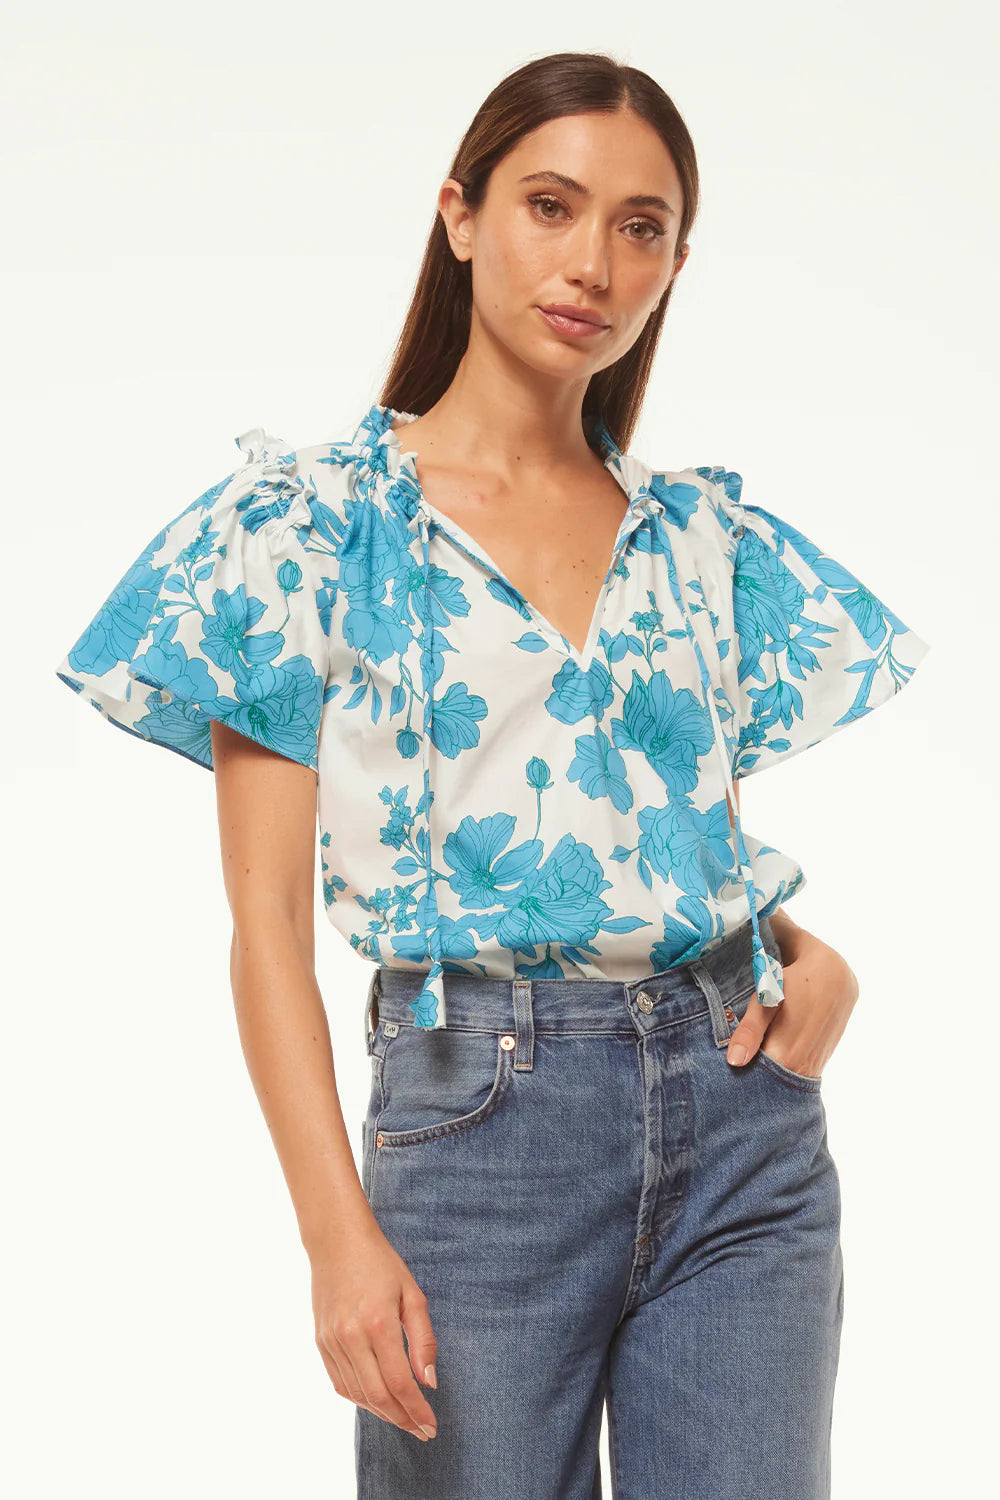 SUPARNA TOP IN TURQUOISE FLORA POPL - Romi Boutique